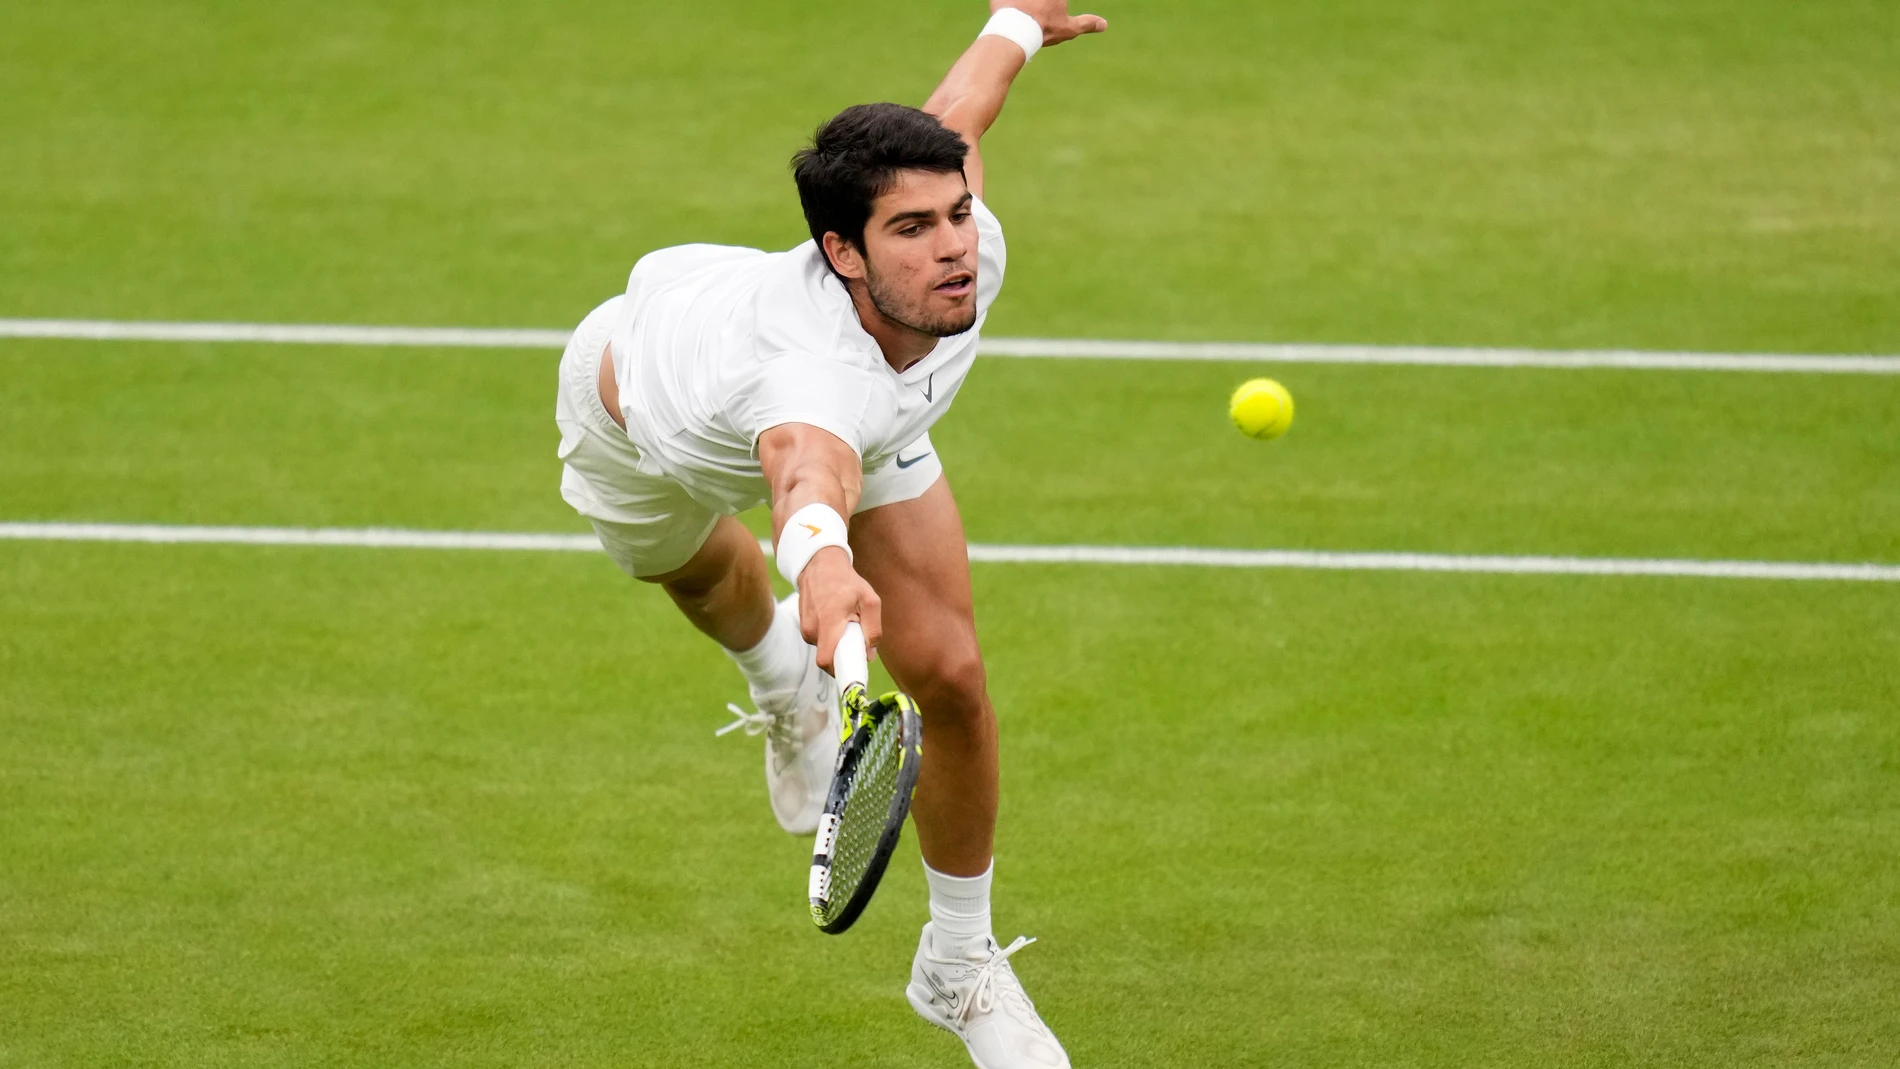 Spain's Carlos Alcaraz returns to Russia's Daniil Medvedev in a men's singles semifinal match on day twelve of the Wimbledon tennis championships in London, Friday, July 14, 2023. (AP Photo/Kirsty Wigglesworth)